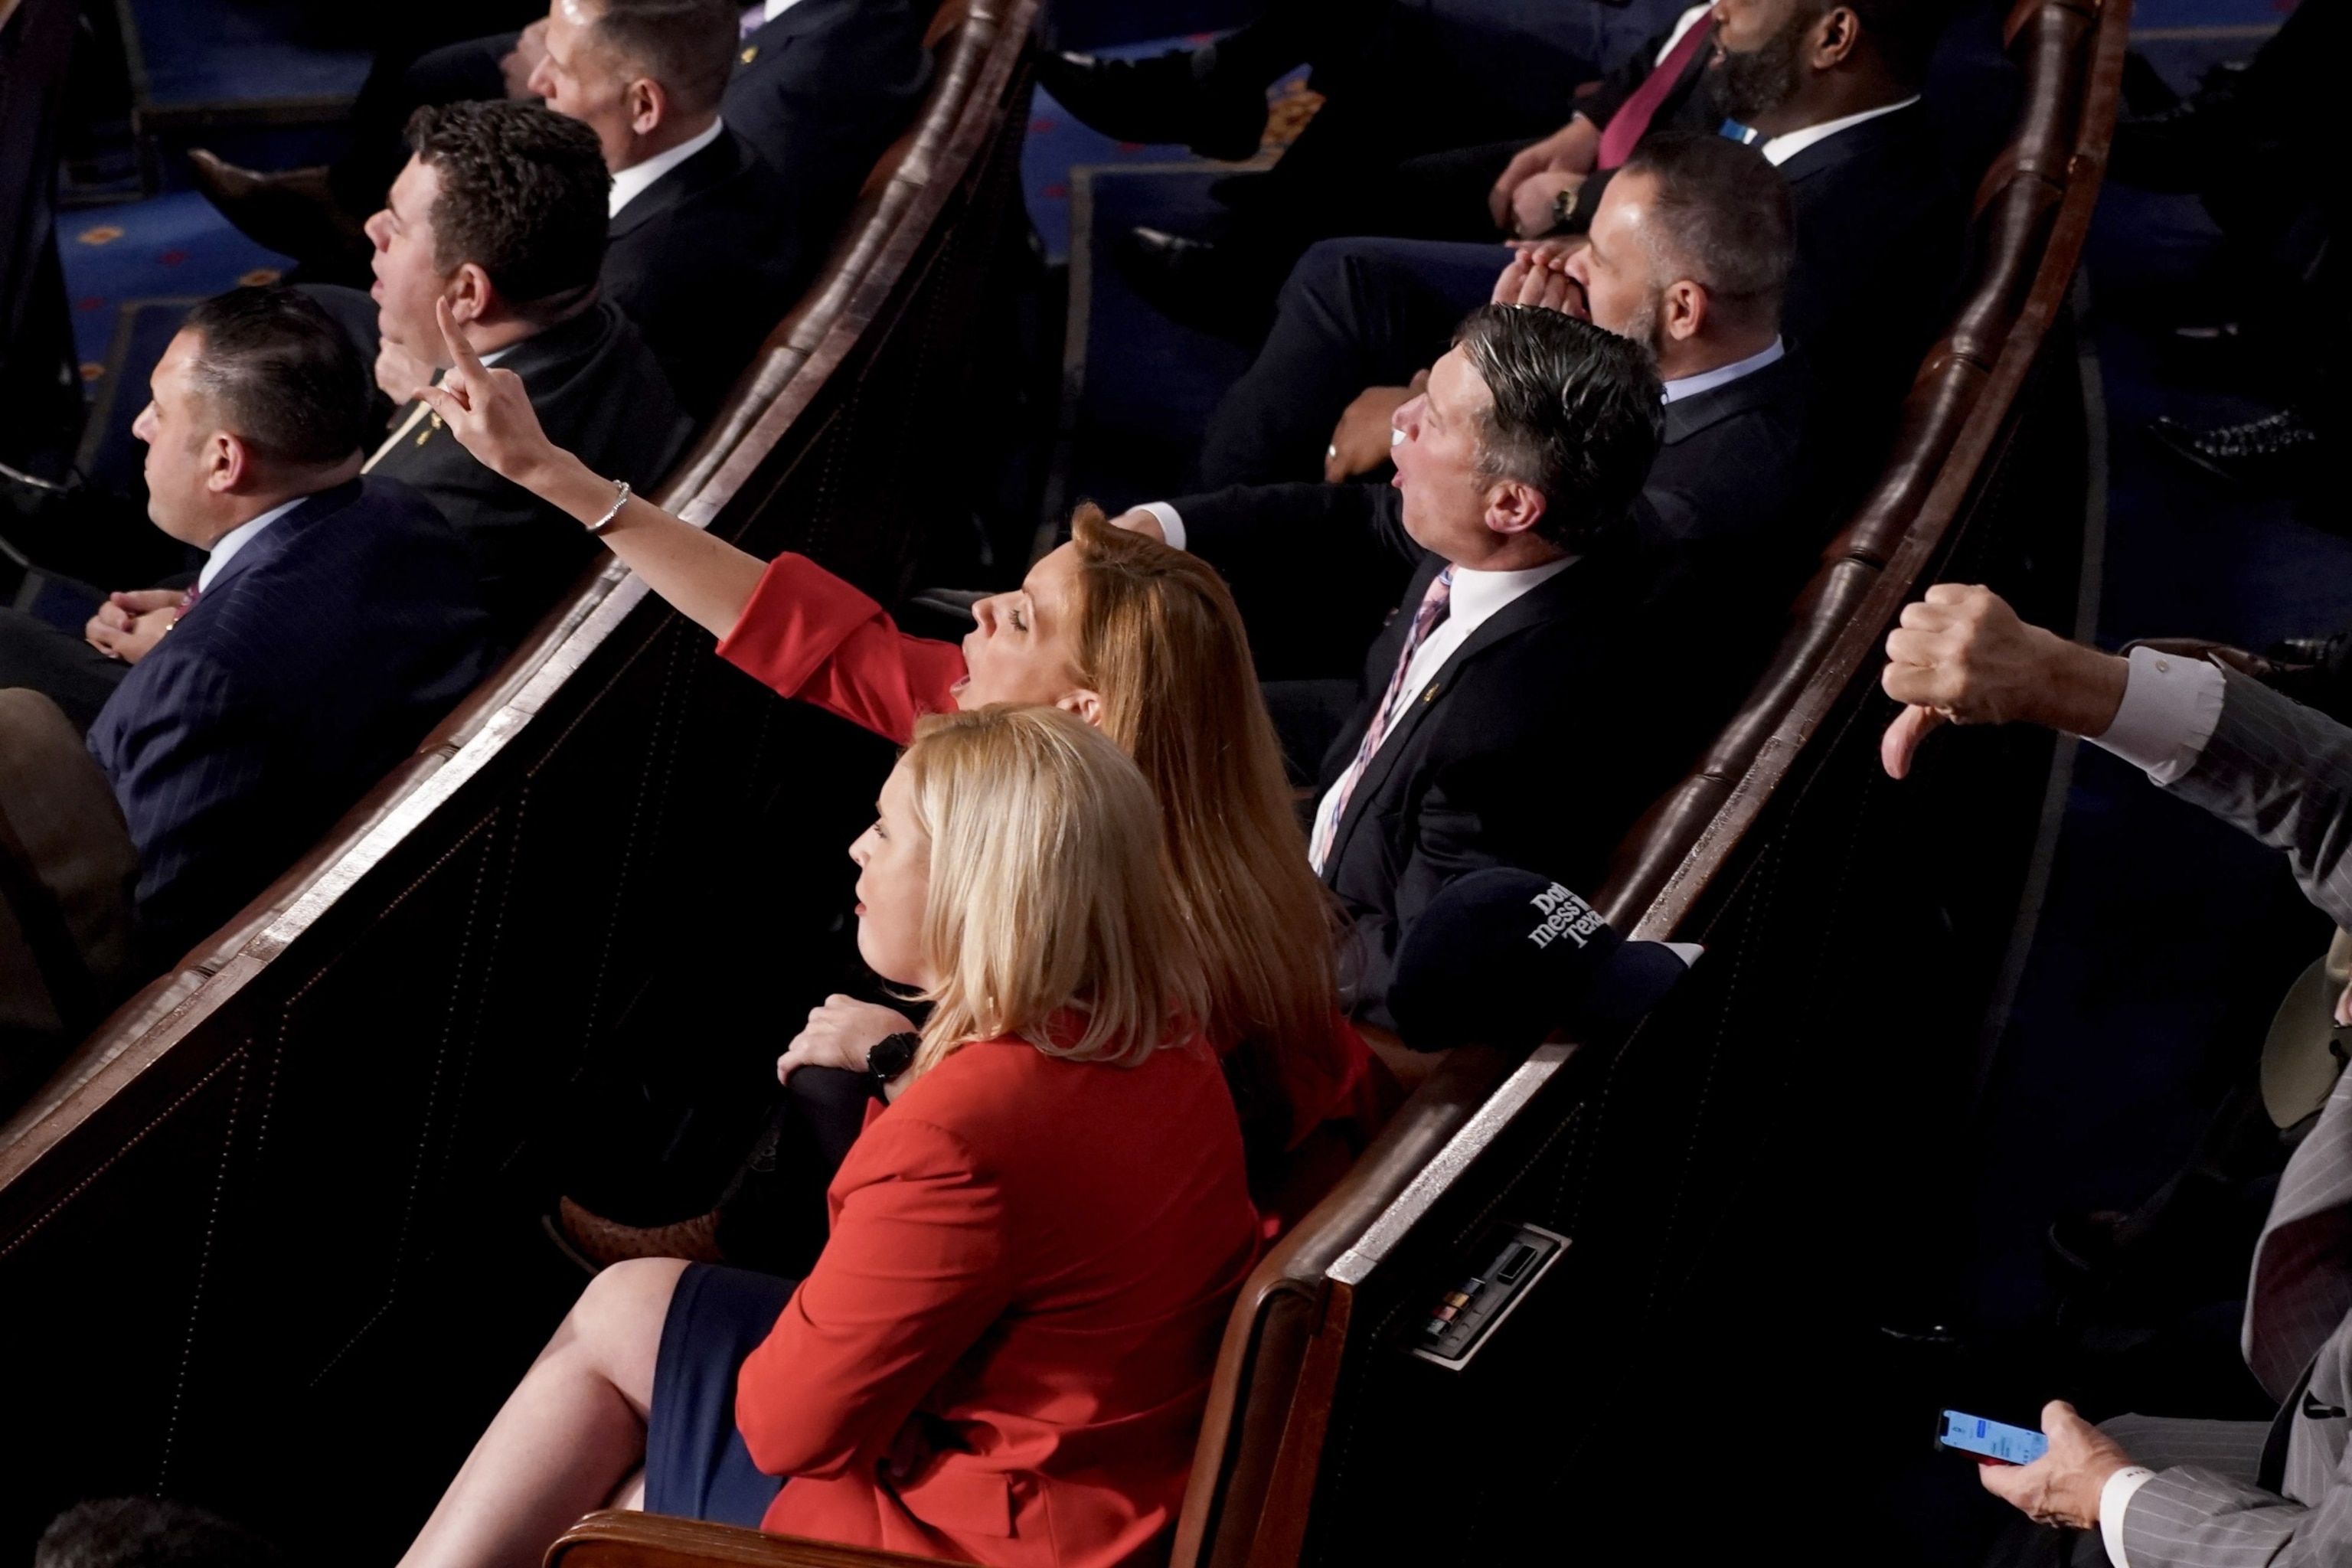 PHOTO: Republican members of Congress yell in response to US President Joe Biden, not pictured, speaking during a State of the Union address at the US Capitol in Washington, DC, Feb. 7, 2023.